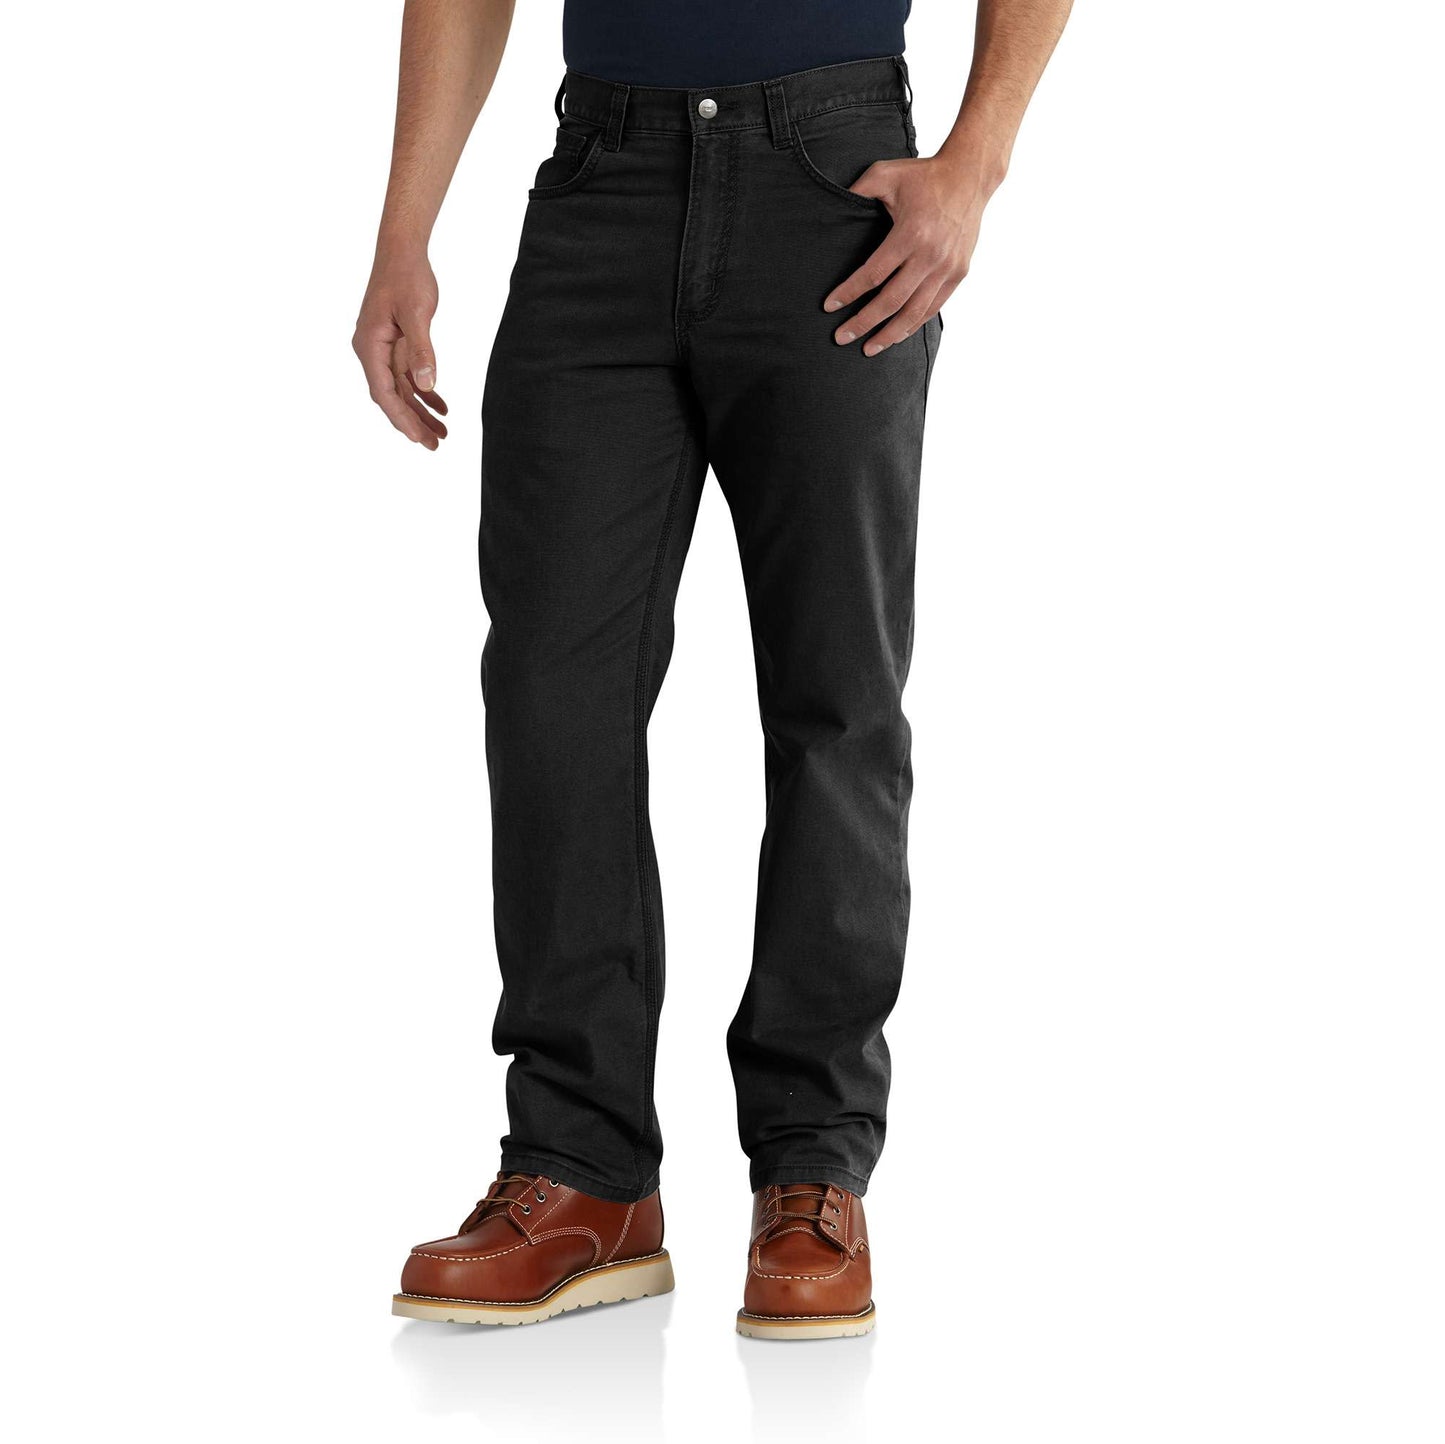 Relaxed Fit 5-Pocket Pants for Men